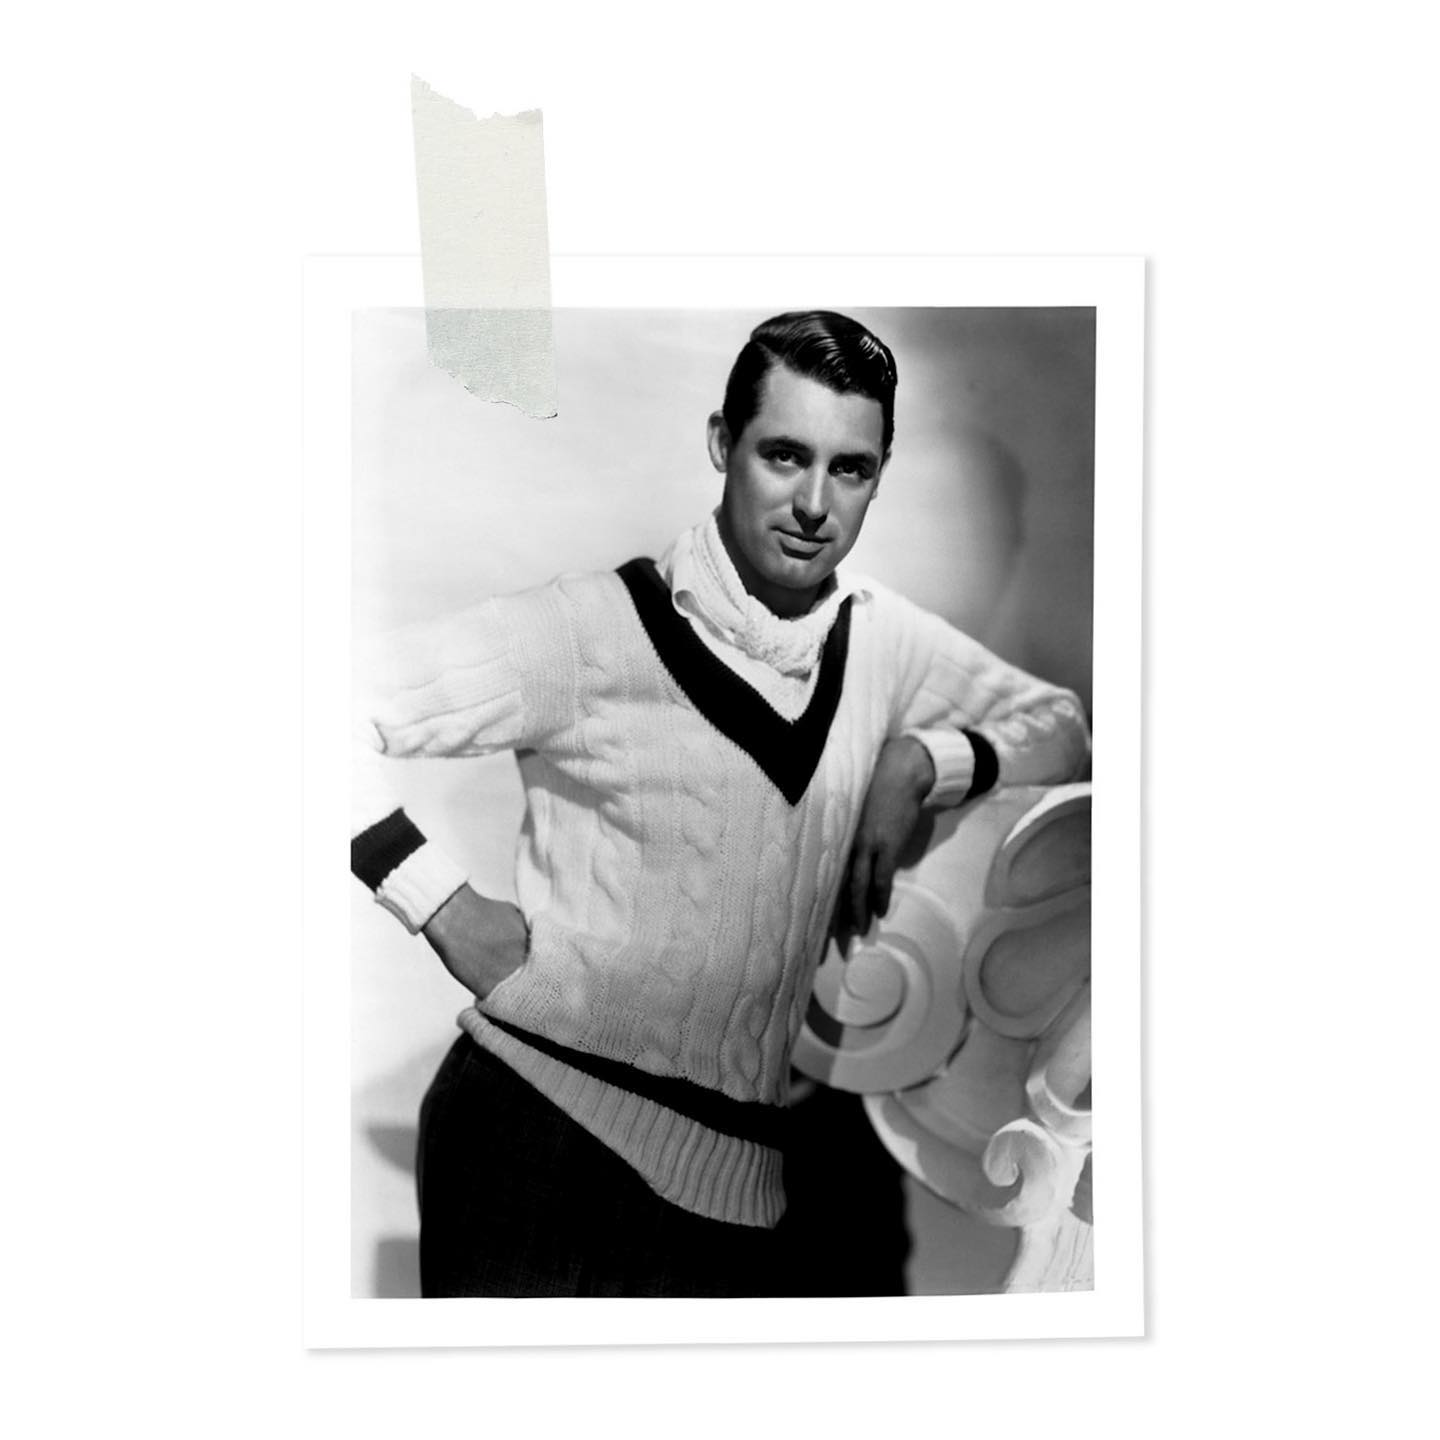 Cary Grant, an icon of preppy style was one of the founding members of the Hollywood Cricket Club established in 1932 and dressed by Kent & Curwen. He famously took the cricket sweater from the playing field to the silver screen and it’s place in men’s style was created and the glamour of preppy codes established.